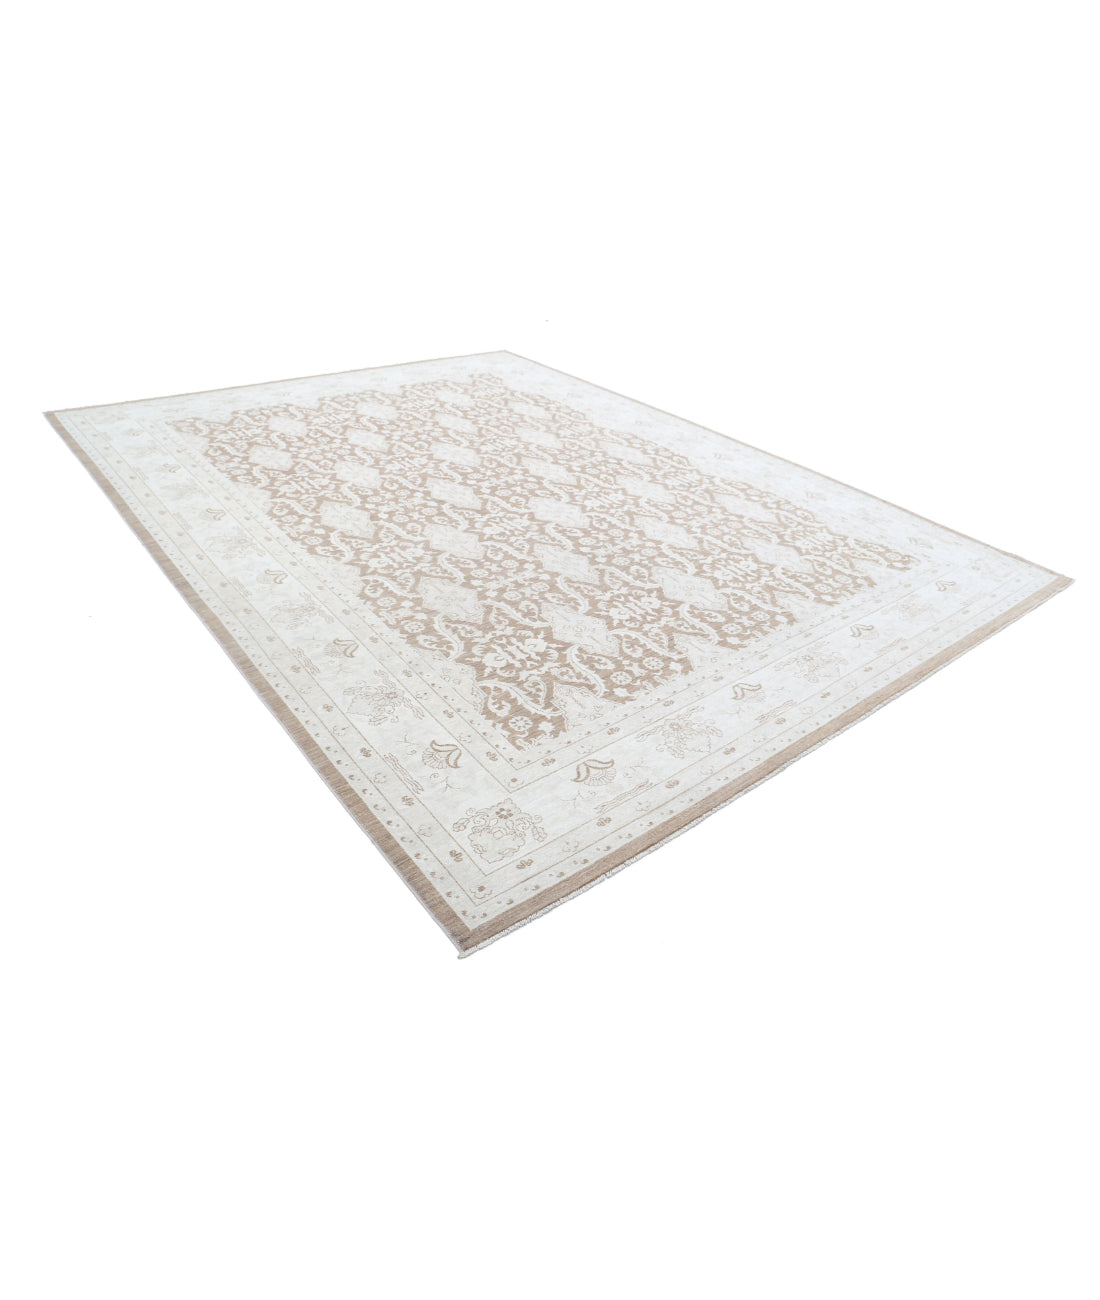 Serenity 9'10'' X 13'5'' Hand-Knotted Wool Rug 9'10'' x 13'5'' (295 X 403) / Taupe / Ivory